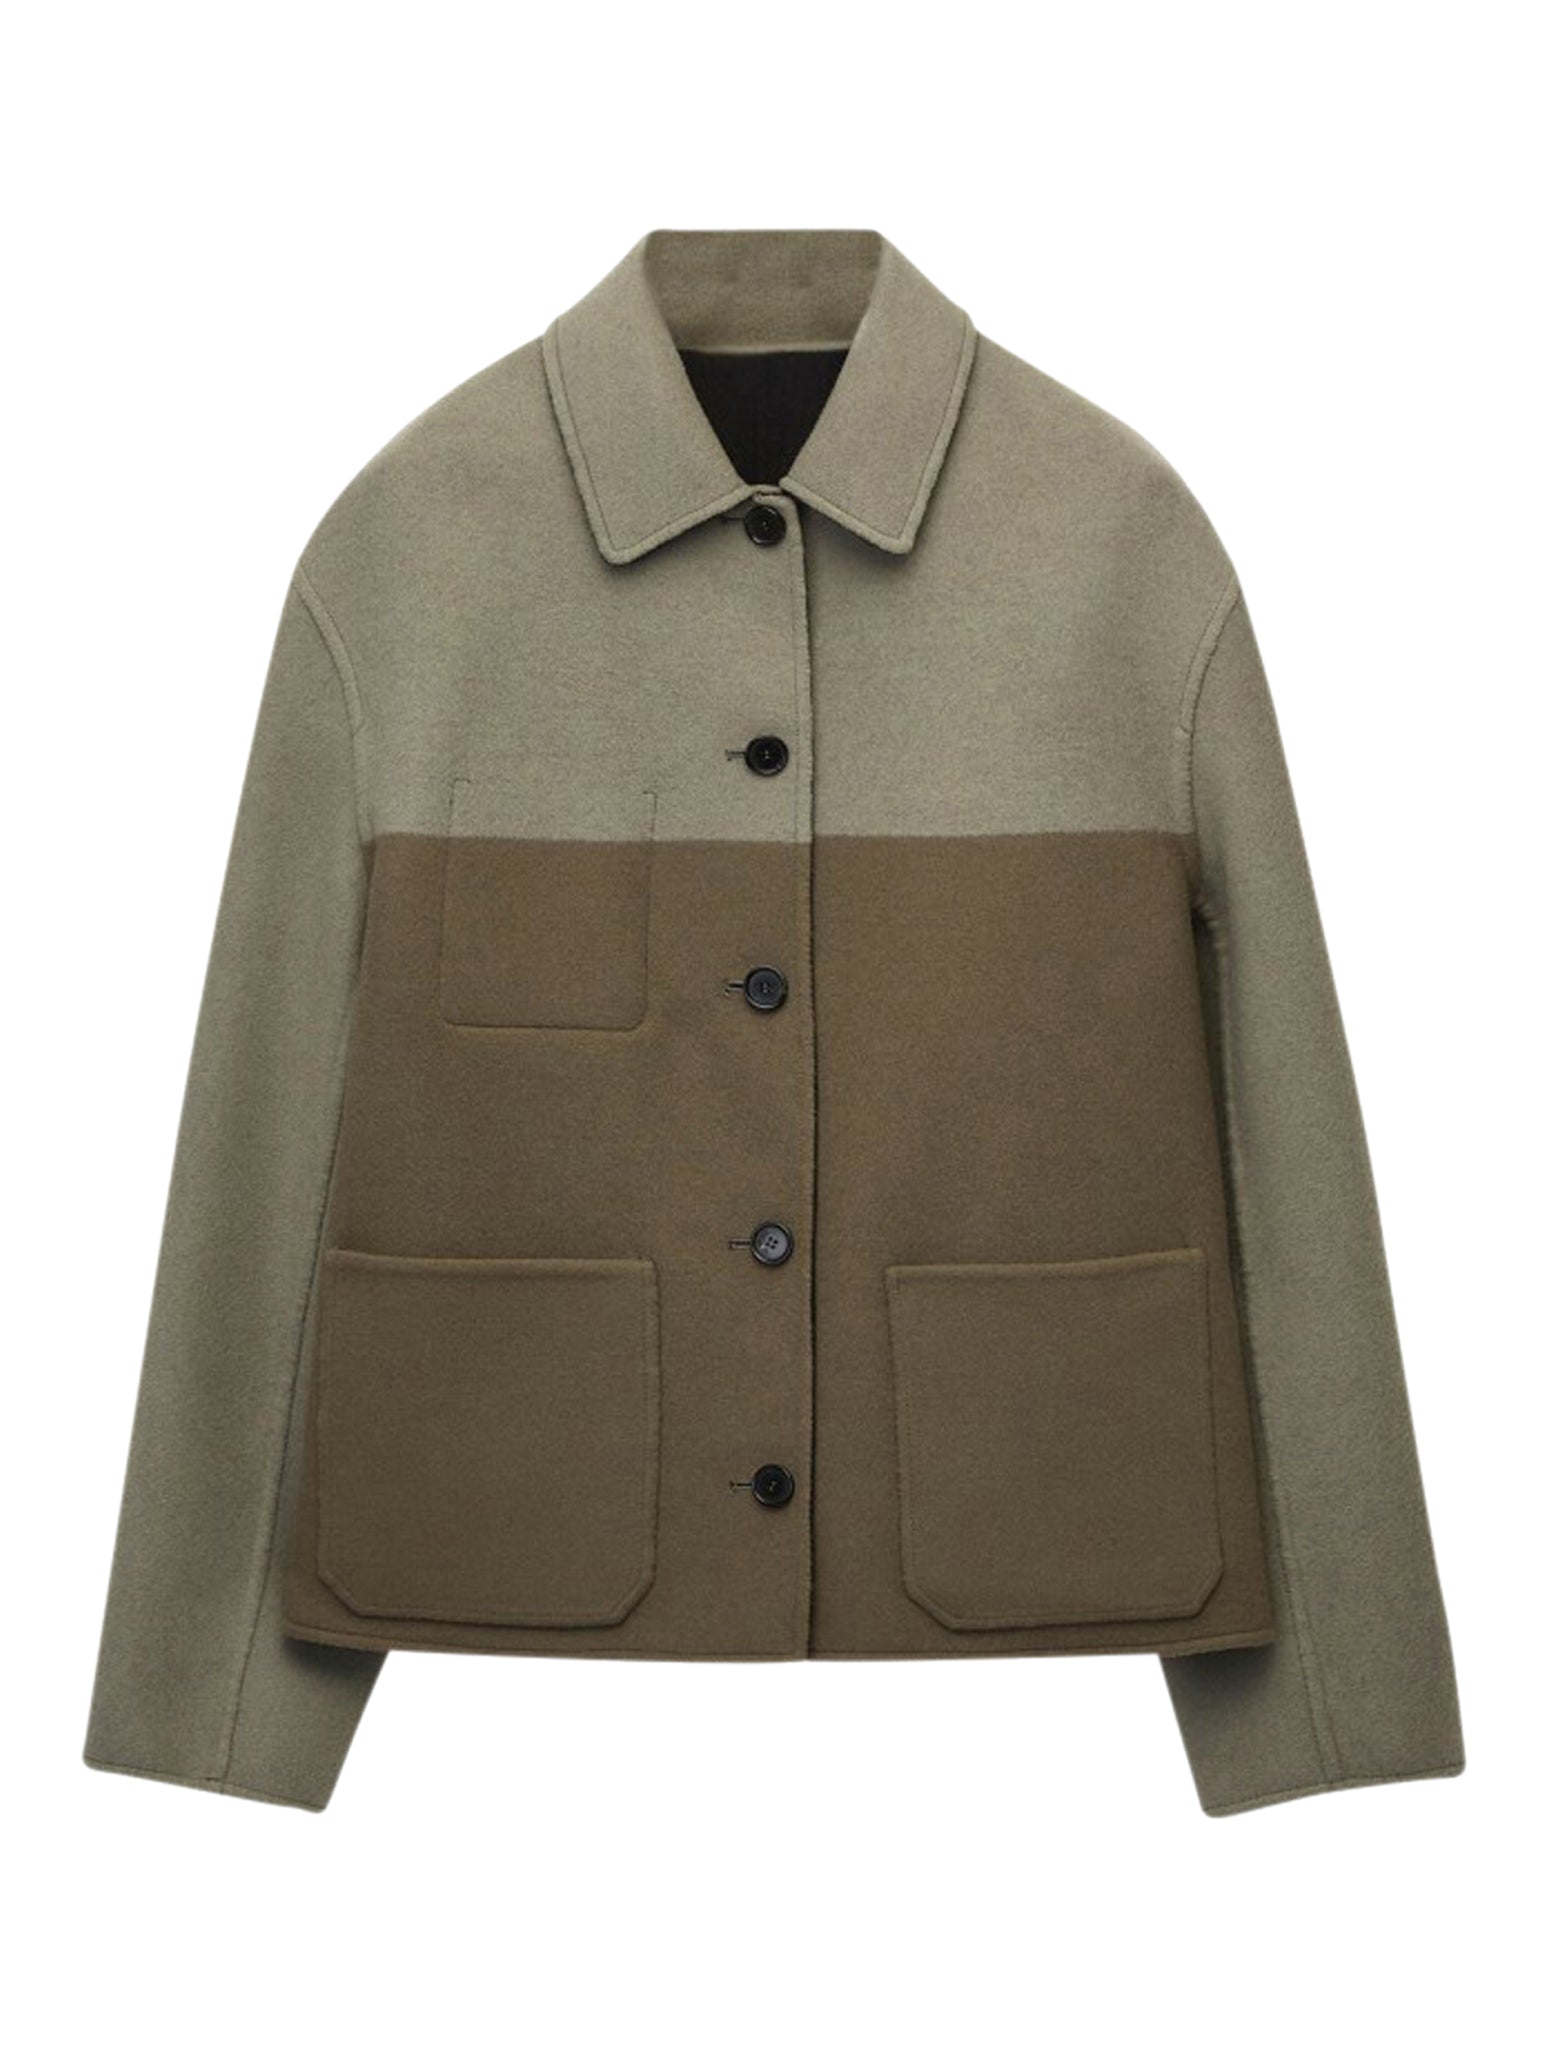 Reversible workwear jacket in wool, cashmere and silk